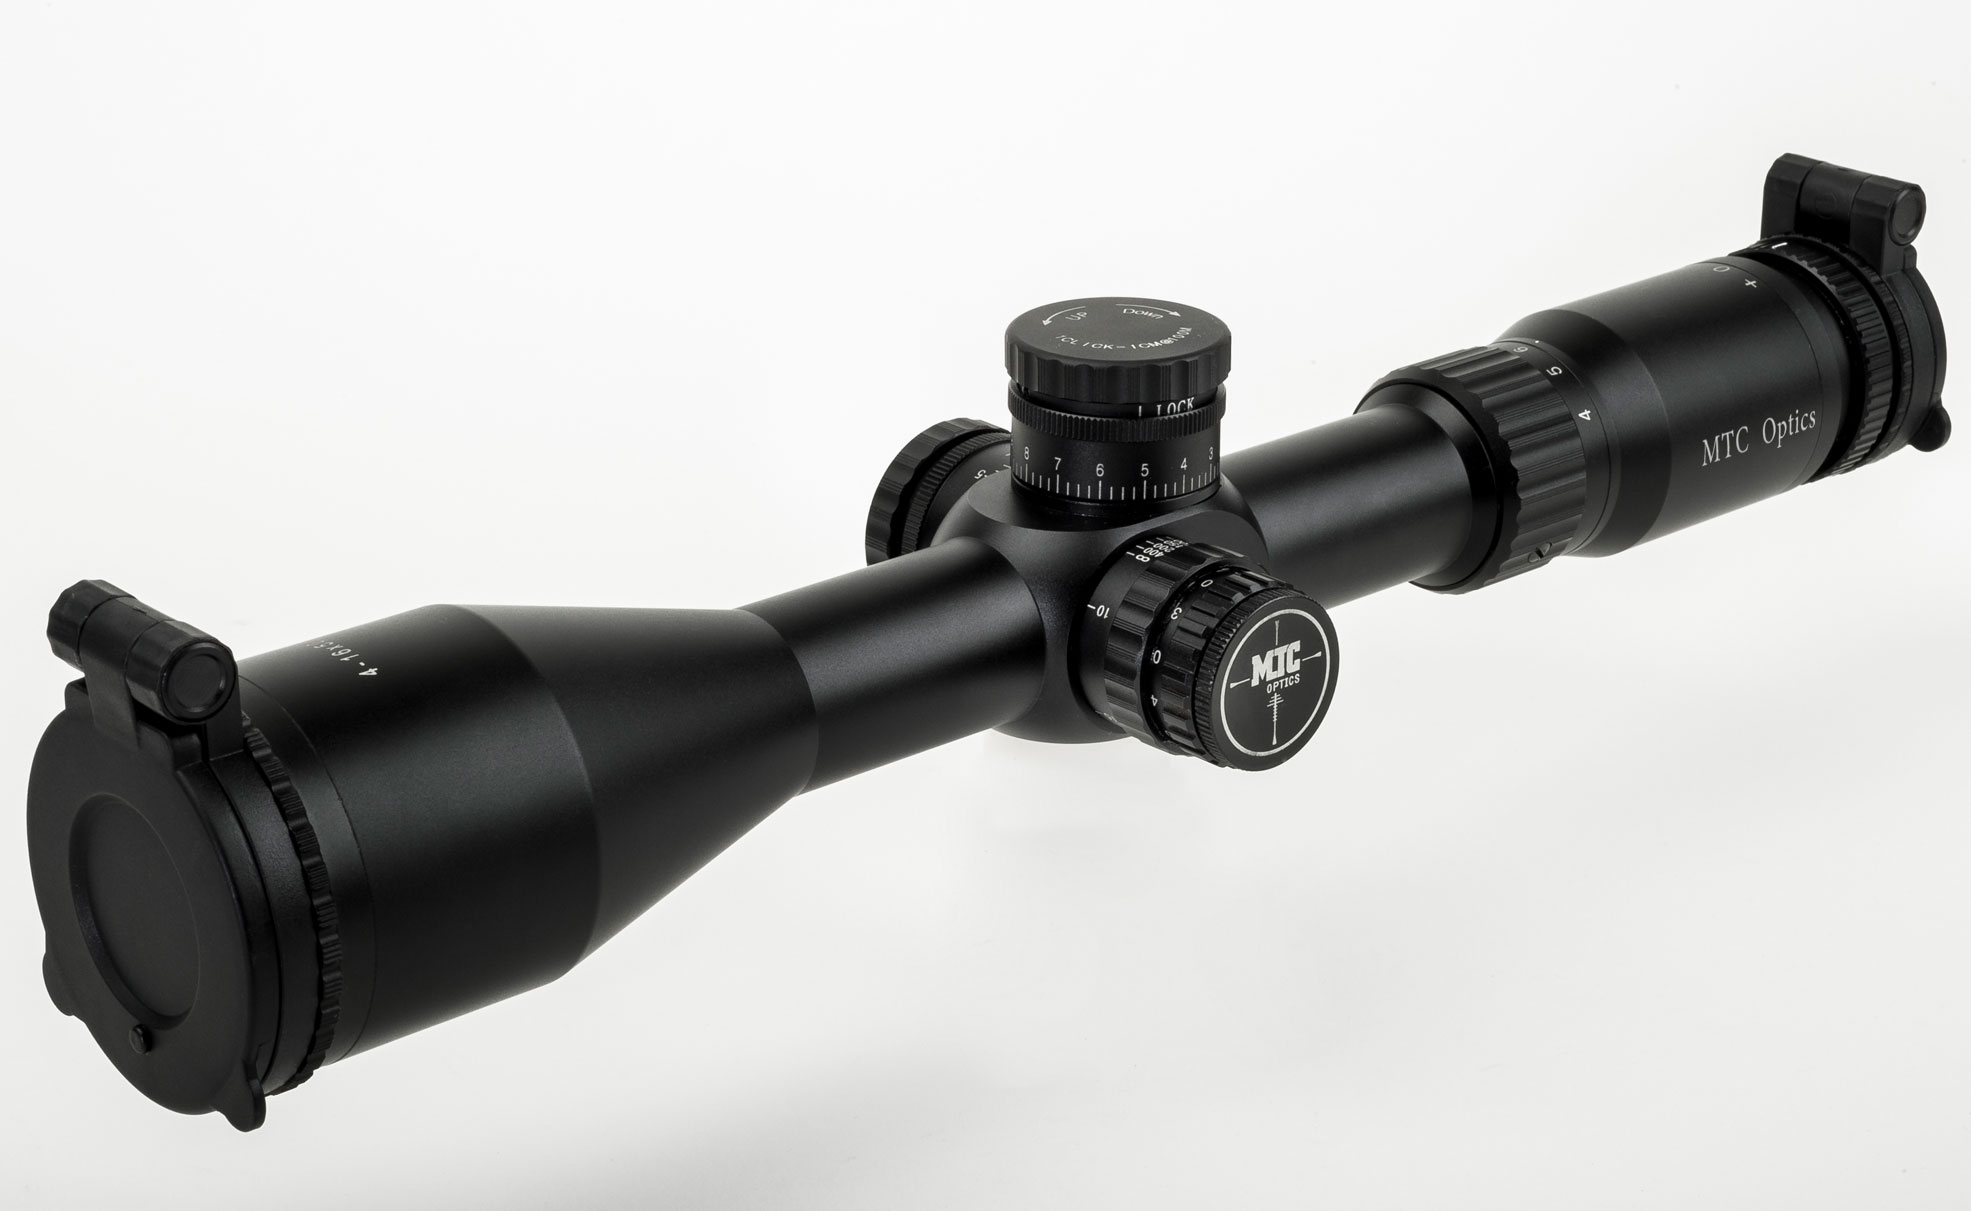 How a First Focal Plane Riflescope differs from a Second Focal Plane one